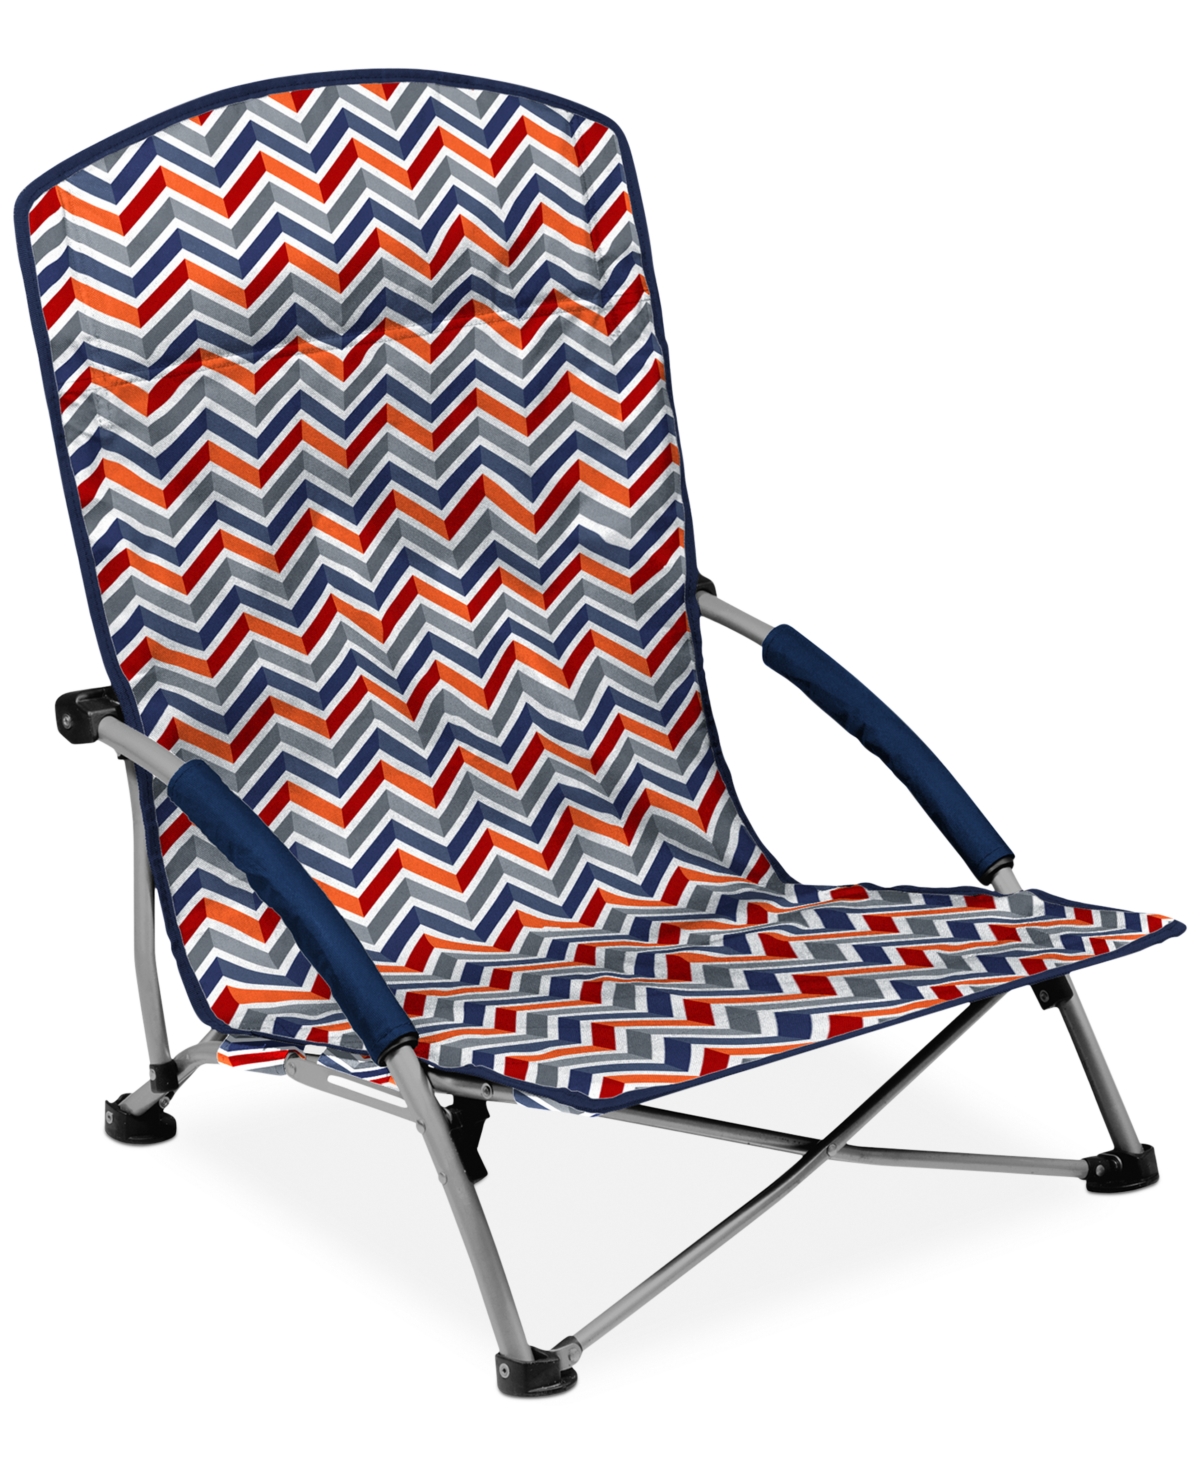 by Picnic Time Vibe Tranquility Portable Beach Chair - NAVY